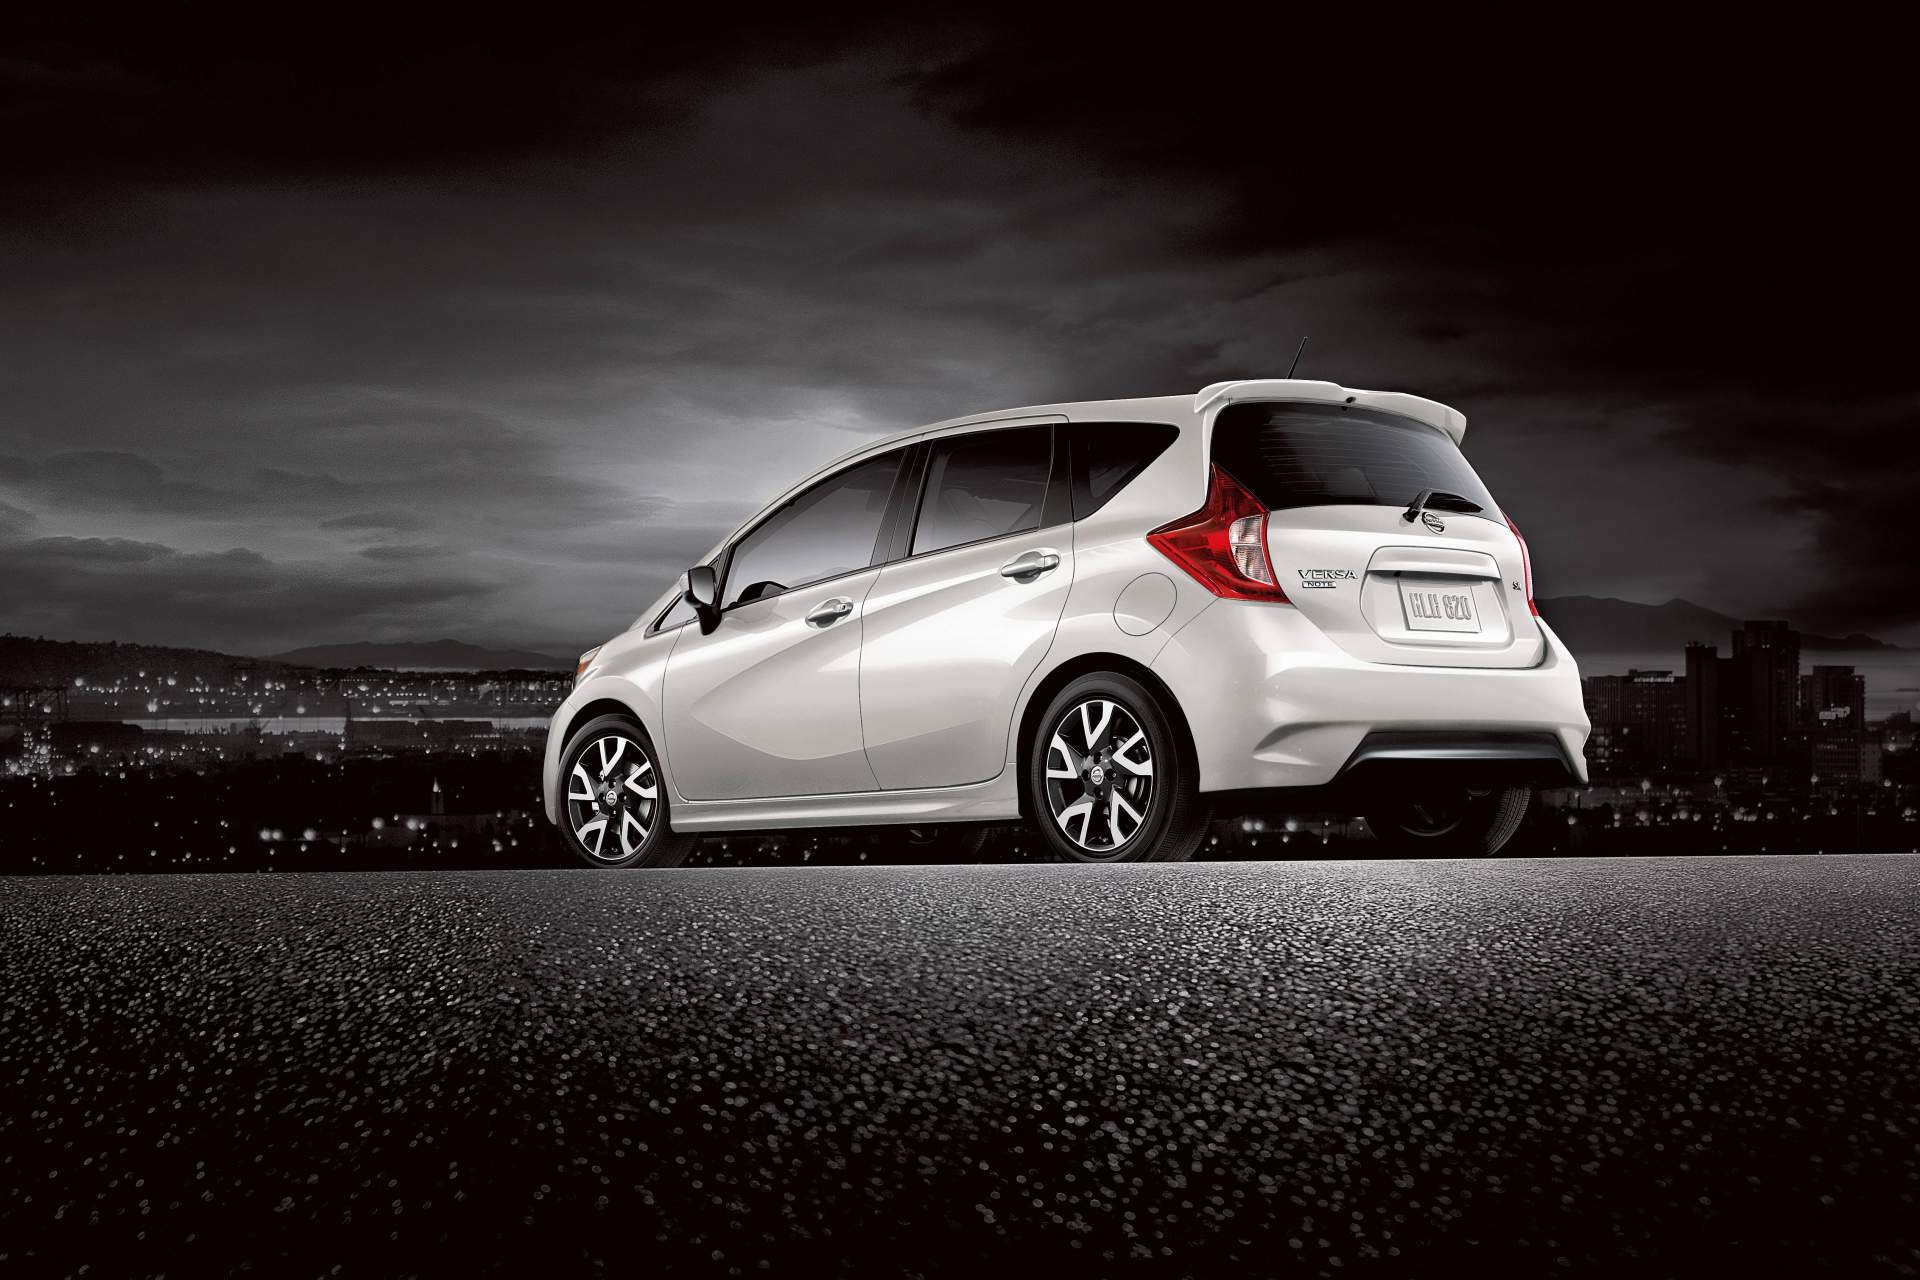 2019 Nissan Versa Note Priced From $15,650 - autoevolution